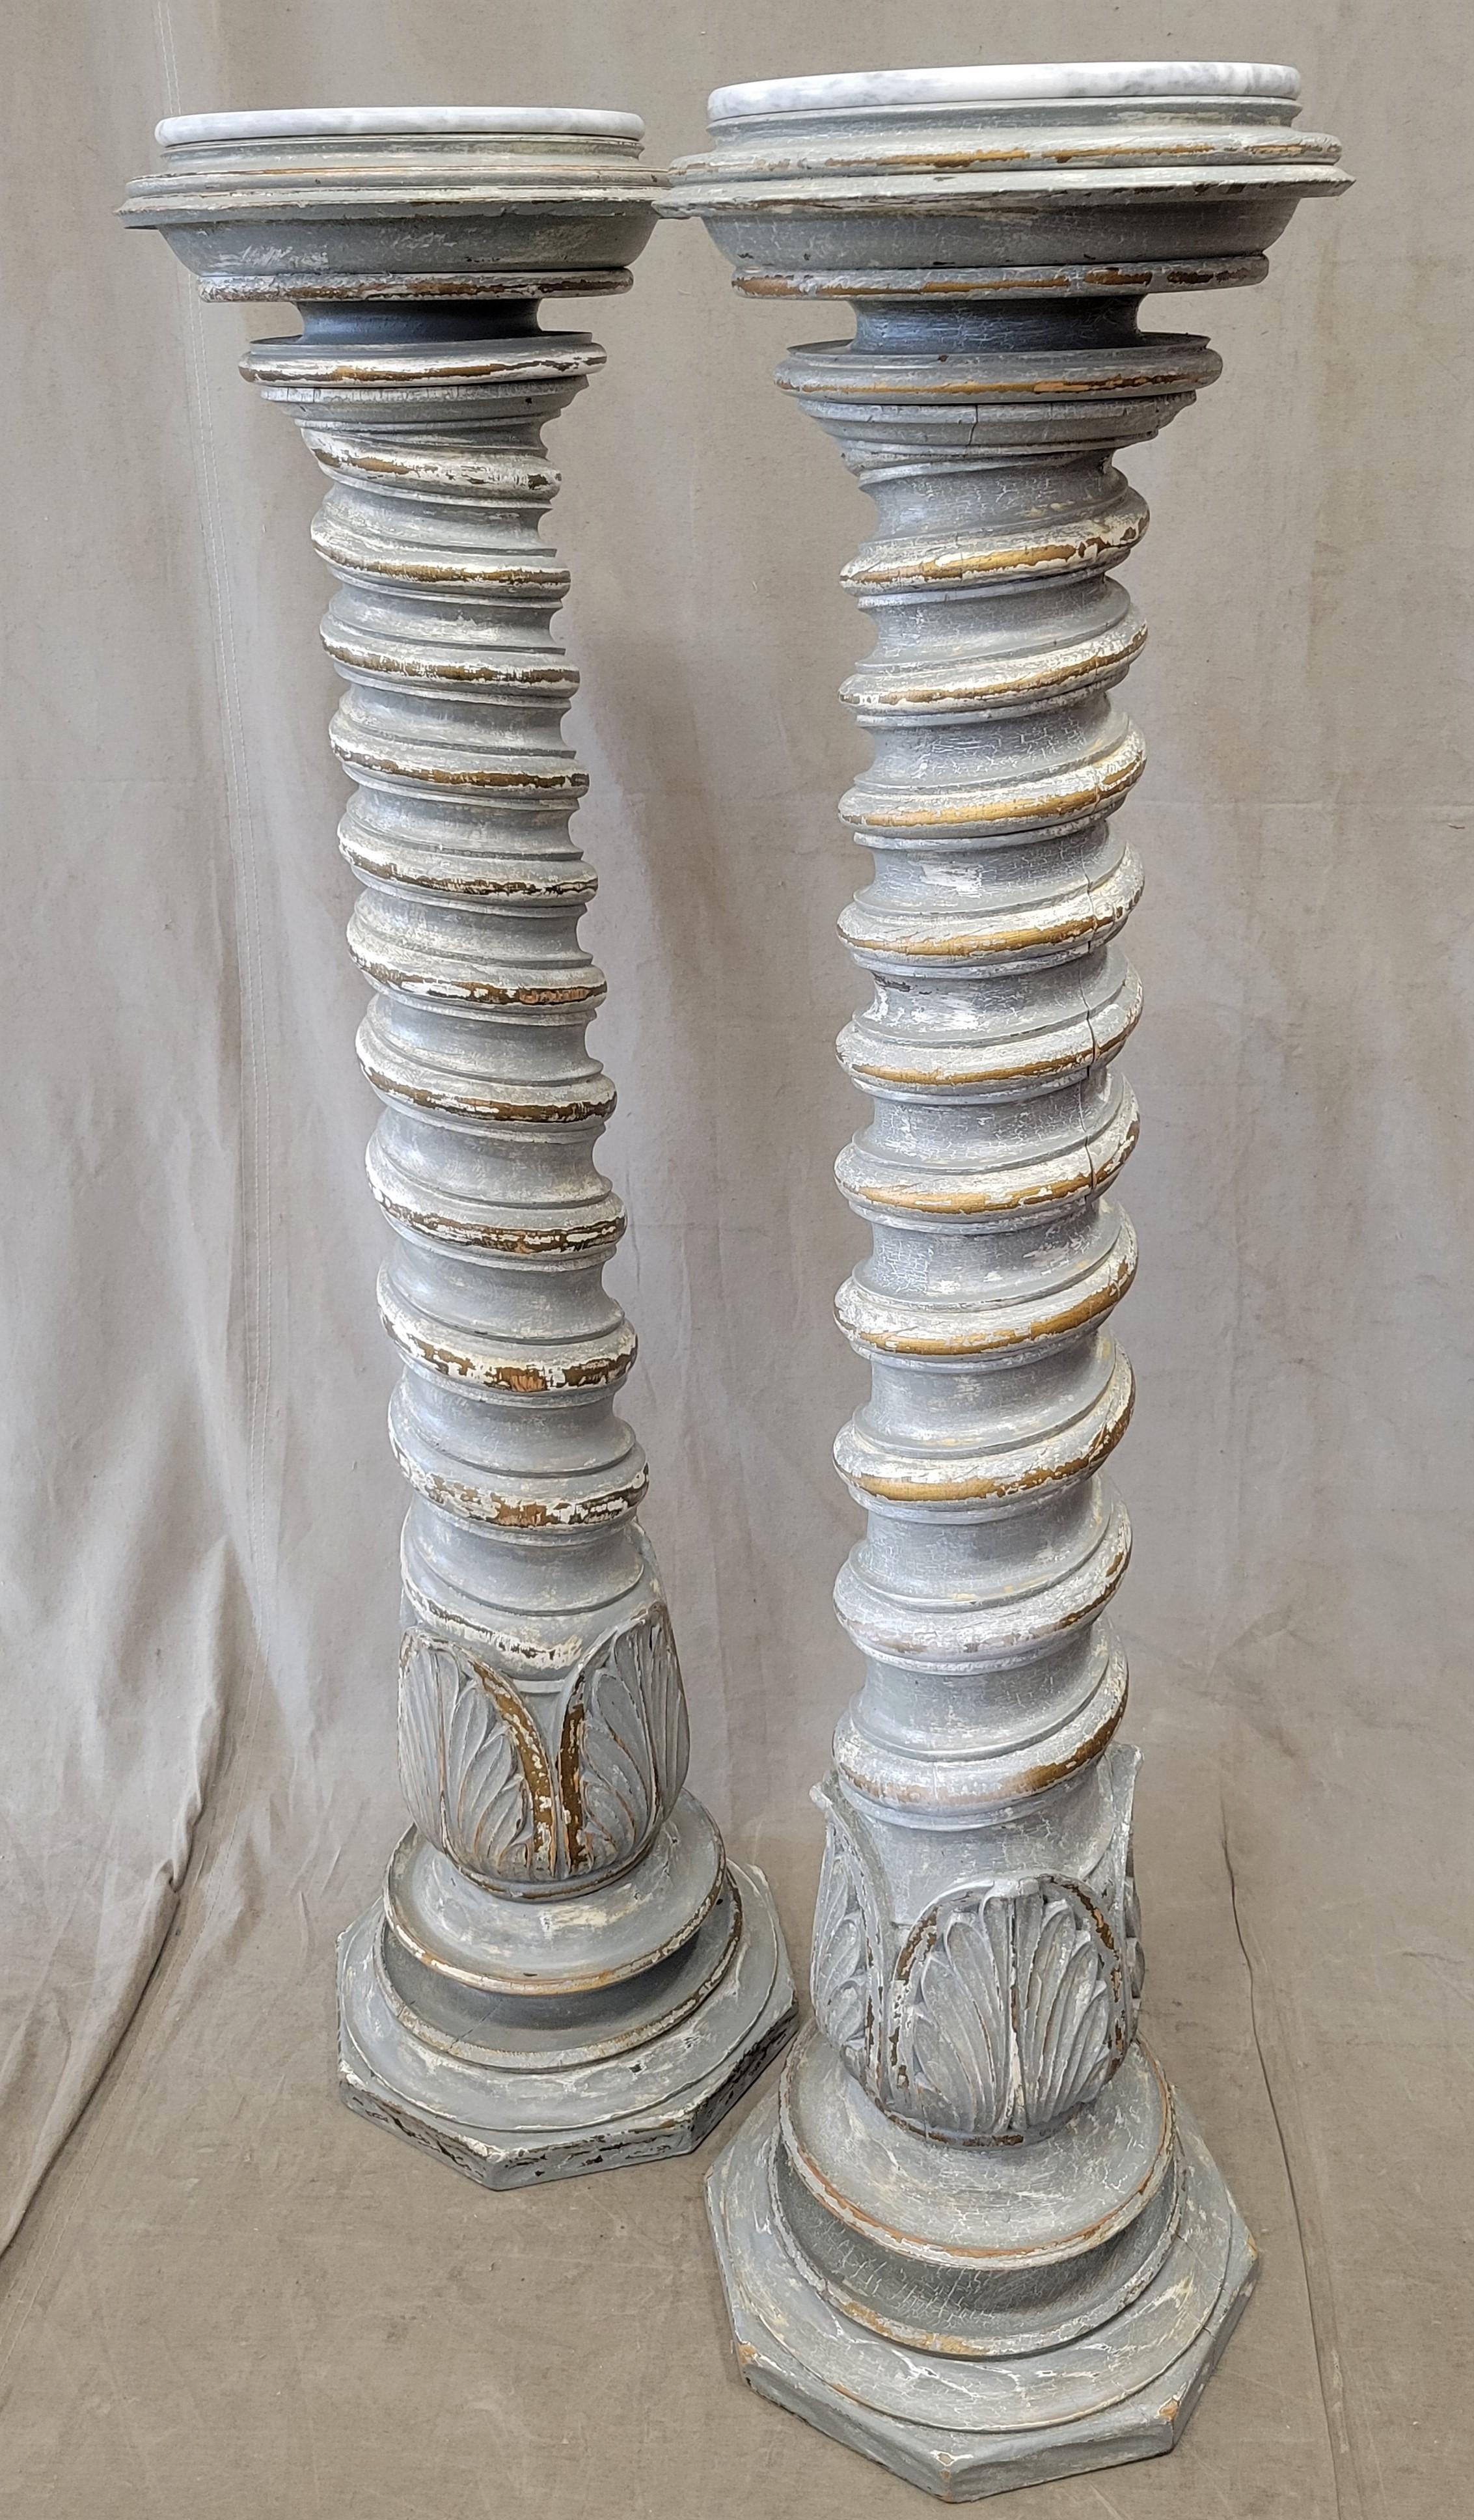 A stunning pair of vintage barley twist pillar plant or sculpture stands with distressed French gray paint with gold and white accents. Carrera marble tops add a classic touch and a flat surface for plants or sculptures. Note the carved palm motif